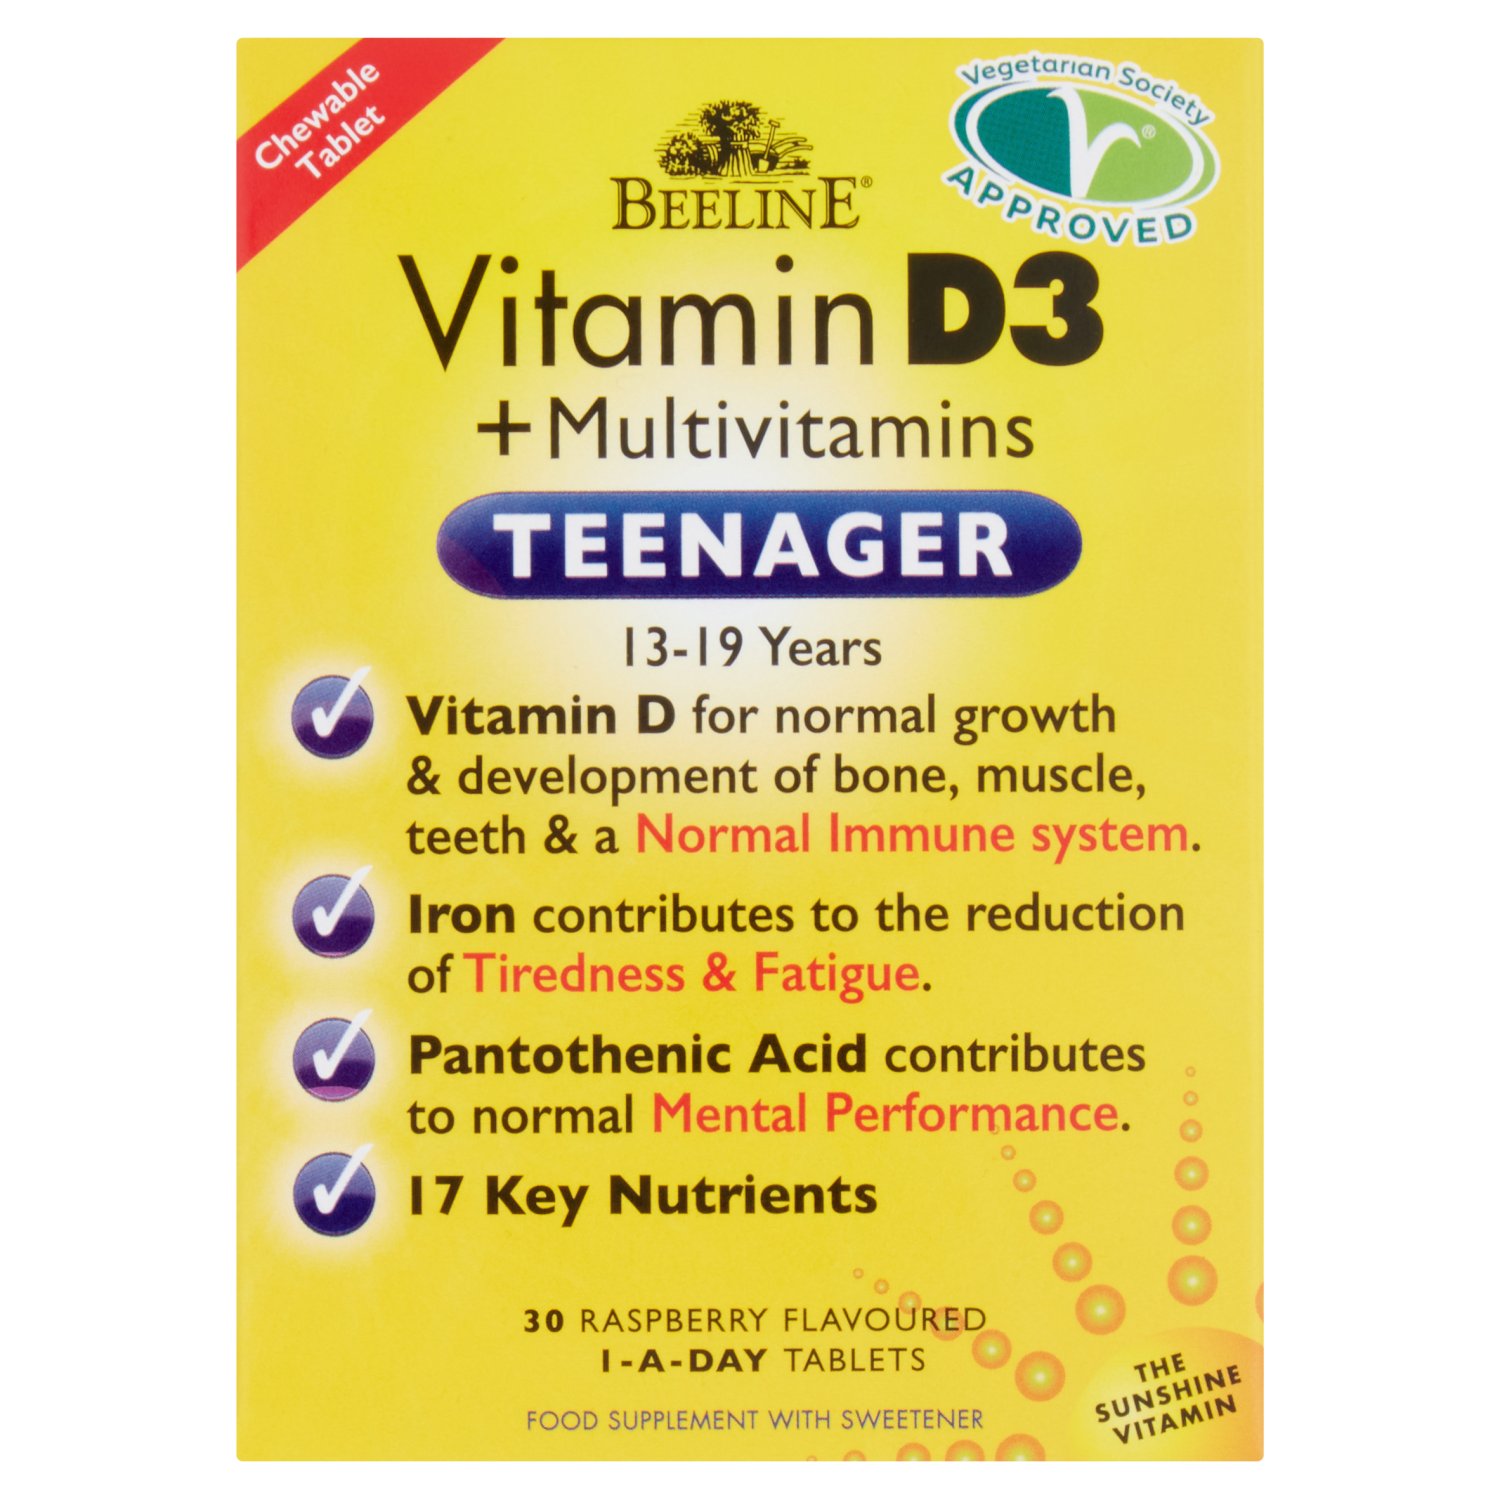 Vitamin D for normal growth & development of bone, muscle, teeth & a normal immune system.
Iron contributes to the reduction of tiredness & fatigue.
Pantothenic Acid contributes to normal mental performance.

Beeline Teenager is a tailored supplement to help support the nutritional needs of Teenagers. Beeline Teenager is designed to help support your physical and mental capacity via key nutrients helping you to get the most out of life by providing fuel for mind and body

Key Benefits
Reduction in tiredness and fatigue.
Vitamins B3, B6, B12 & iron contribute to the reduction of tiredness and fatigue and help you perform at your best.
Energy levels B Vitamins & Iron support normal energy levels.
Iron, Zinc & Pantothenic Acid contribute to normal cognitive function.
Immune Defence Vitamin C & D and Zinc contribute to the normal function of the immune system.
Bone Health Calcium & Vitamin D contribute to the maintenance of normal bones & teeth.
Skin, Hair and Nails Vitamins A, B2 & B3 contribute to the maintenance of normal skin. Zinc & Selenium contribute to the maintenance of normal hair & nails.
Heart and Blood Vitamin B1 contributes to the normal function of the heart. Iron and Vitamin B12 contribute to normal red blood cell formation.